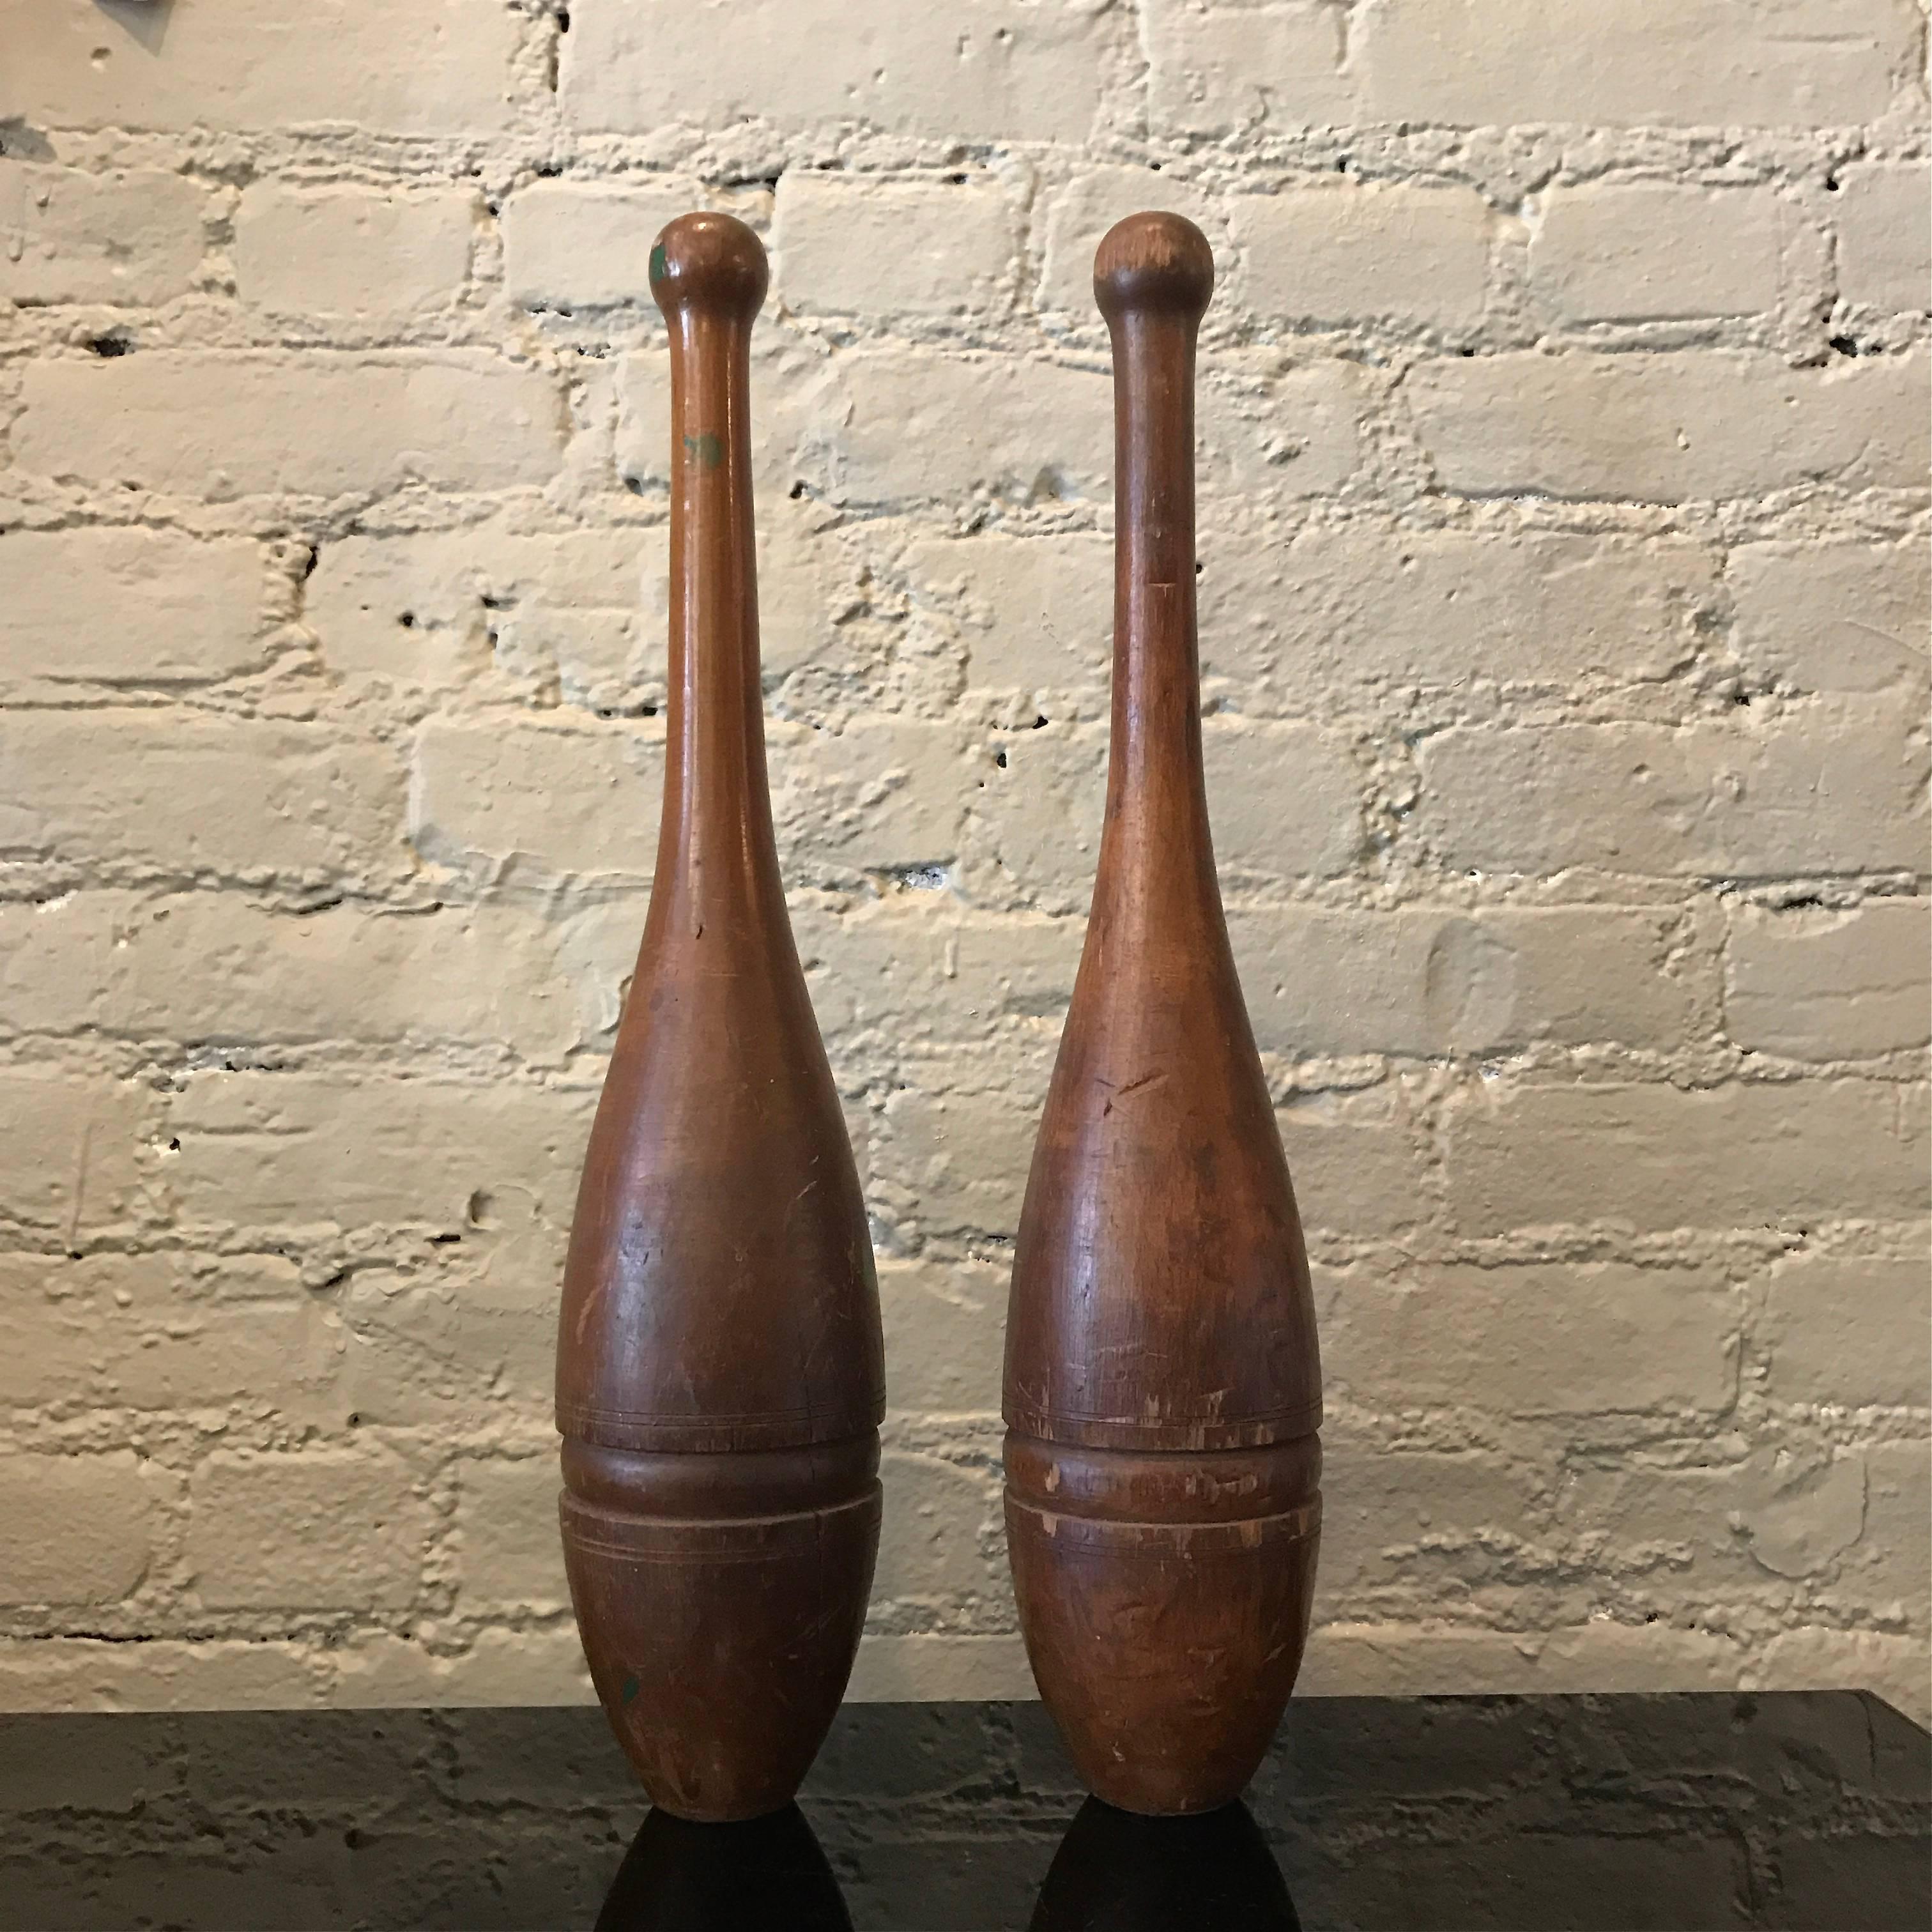 Pair of early 20th century, hand-turned, incised, stained maple wood, juggling pins or 